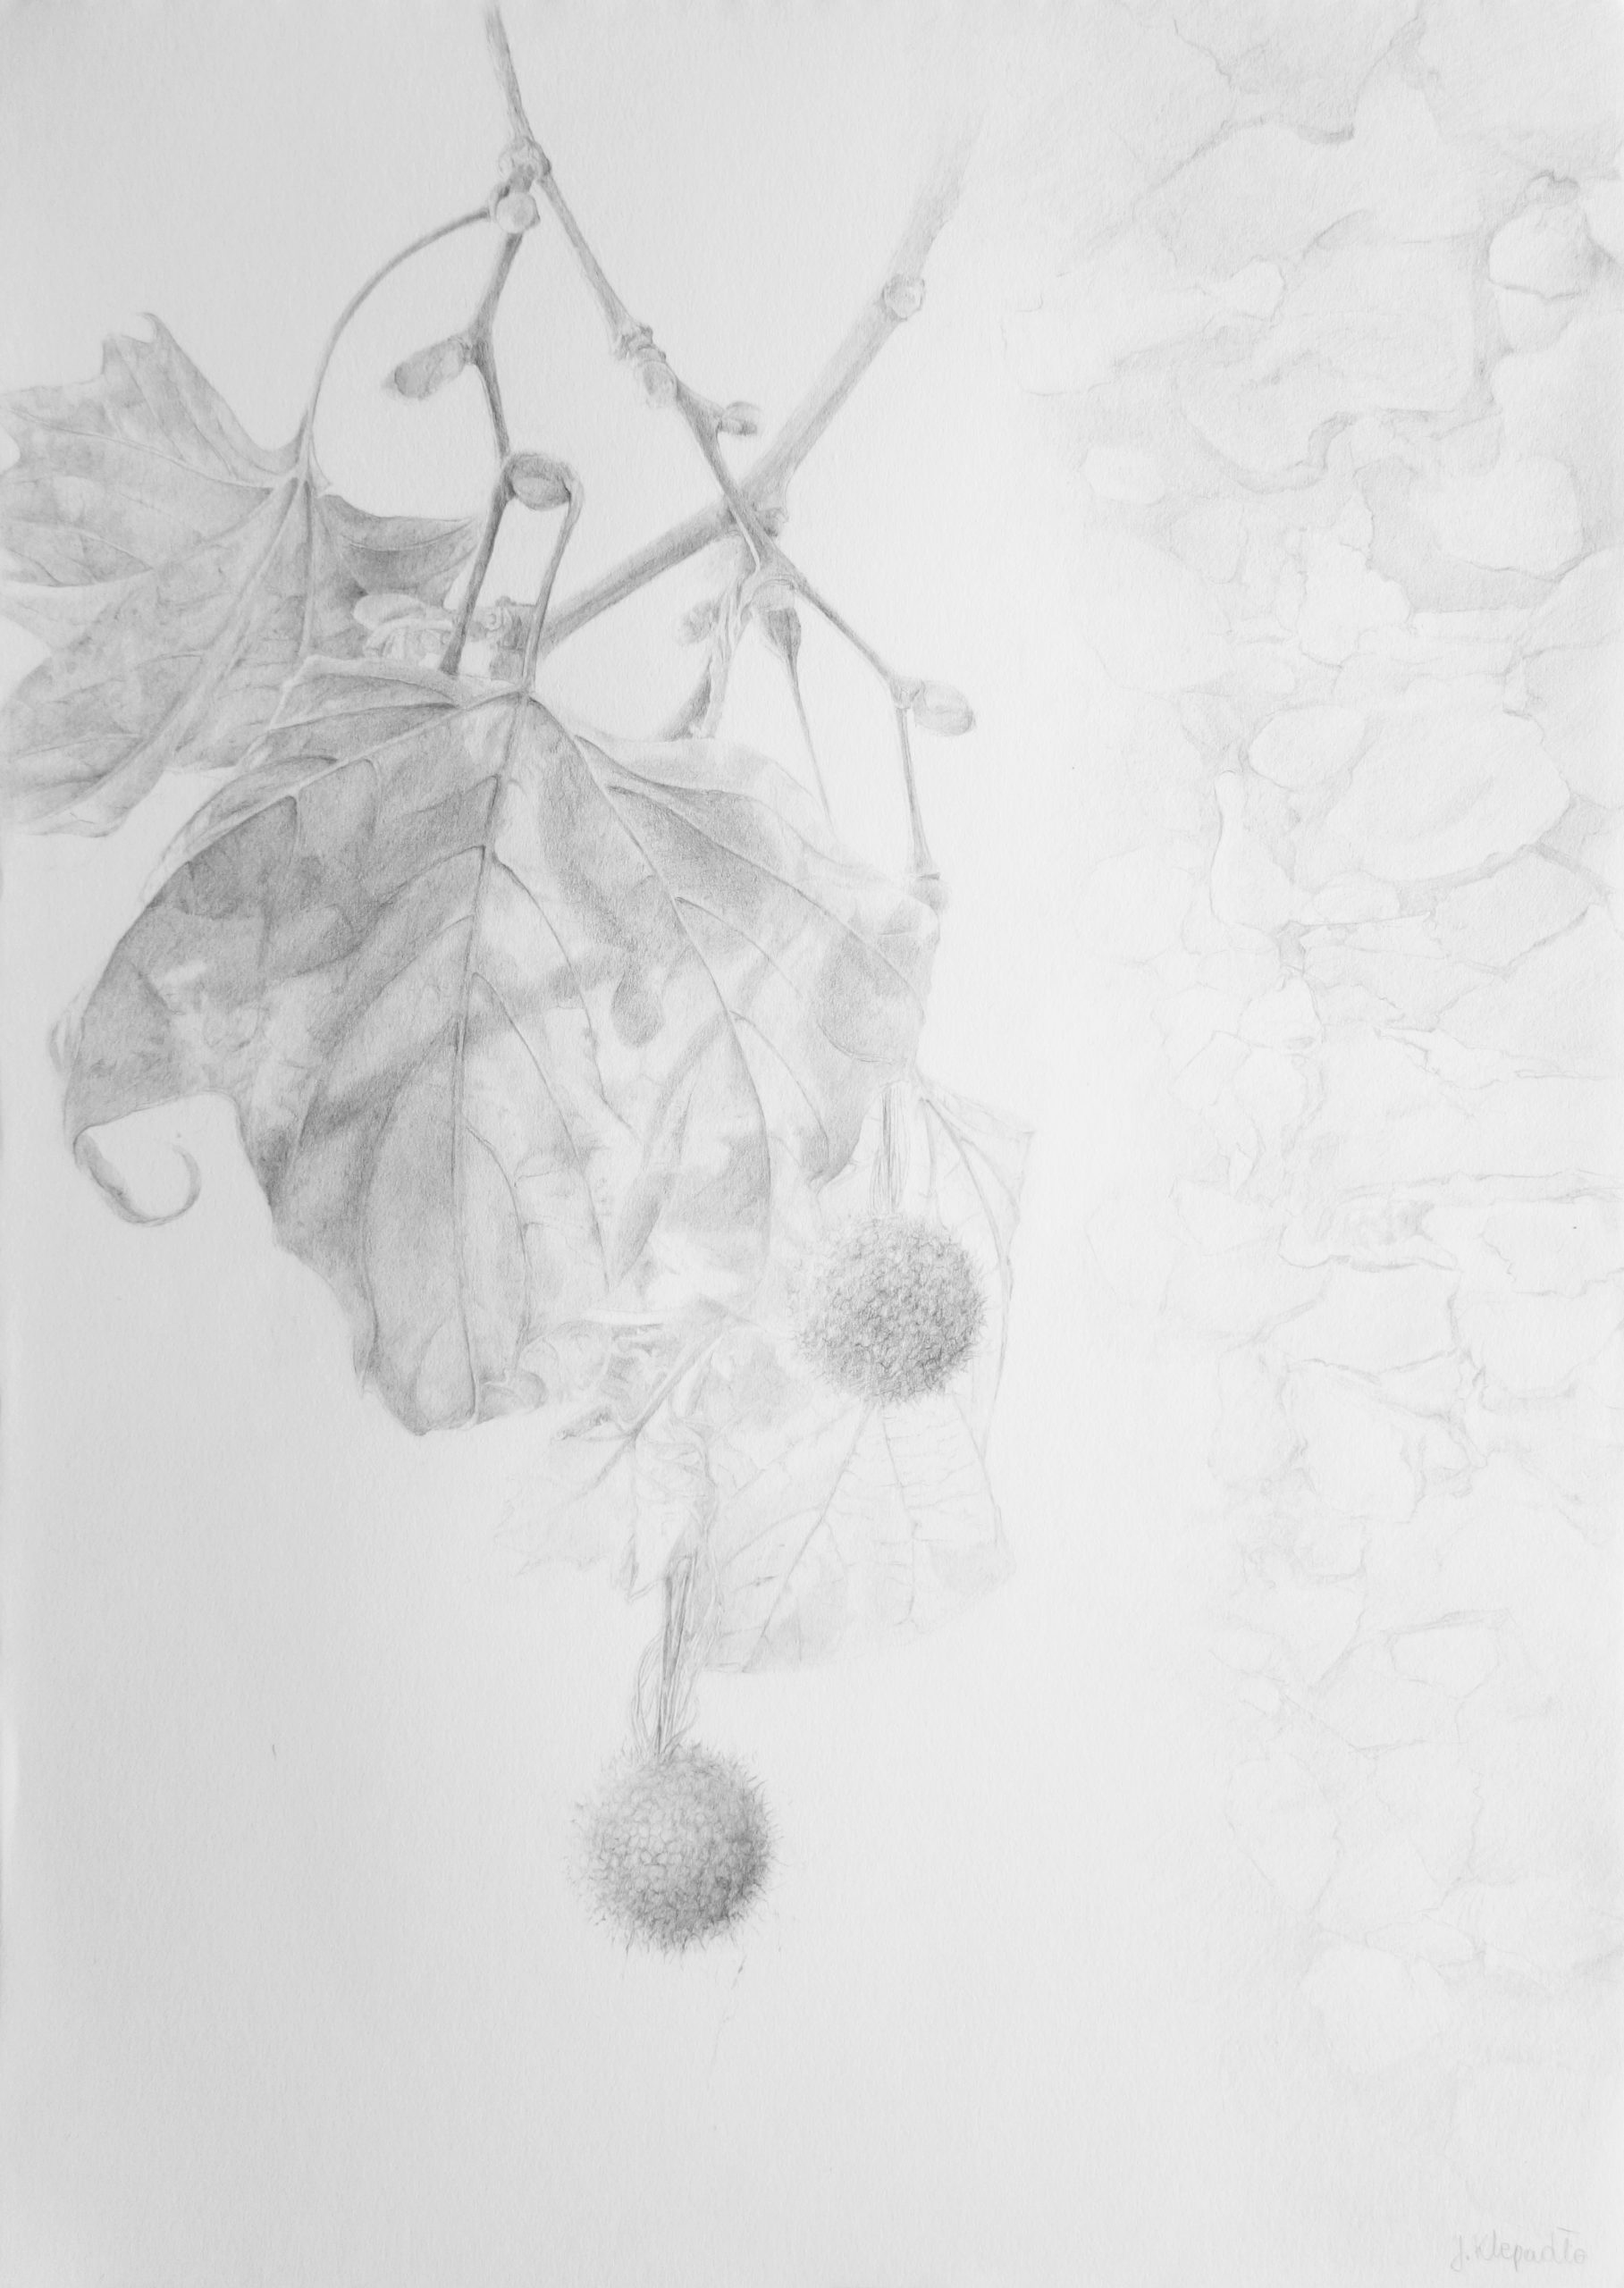 Platanus hispanica, pencil drawing of the plane tree found in the southern Spain, from the series of botanical arworks Plants of Andalucia by Joanna Klepadło